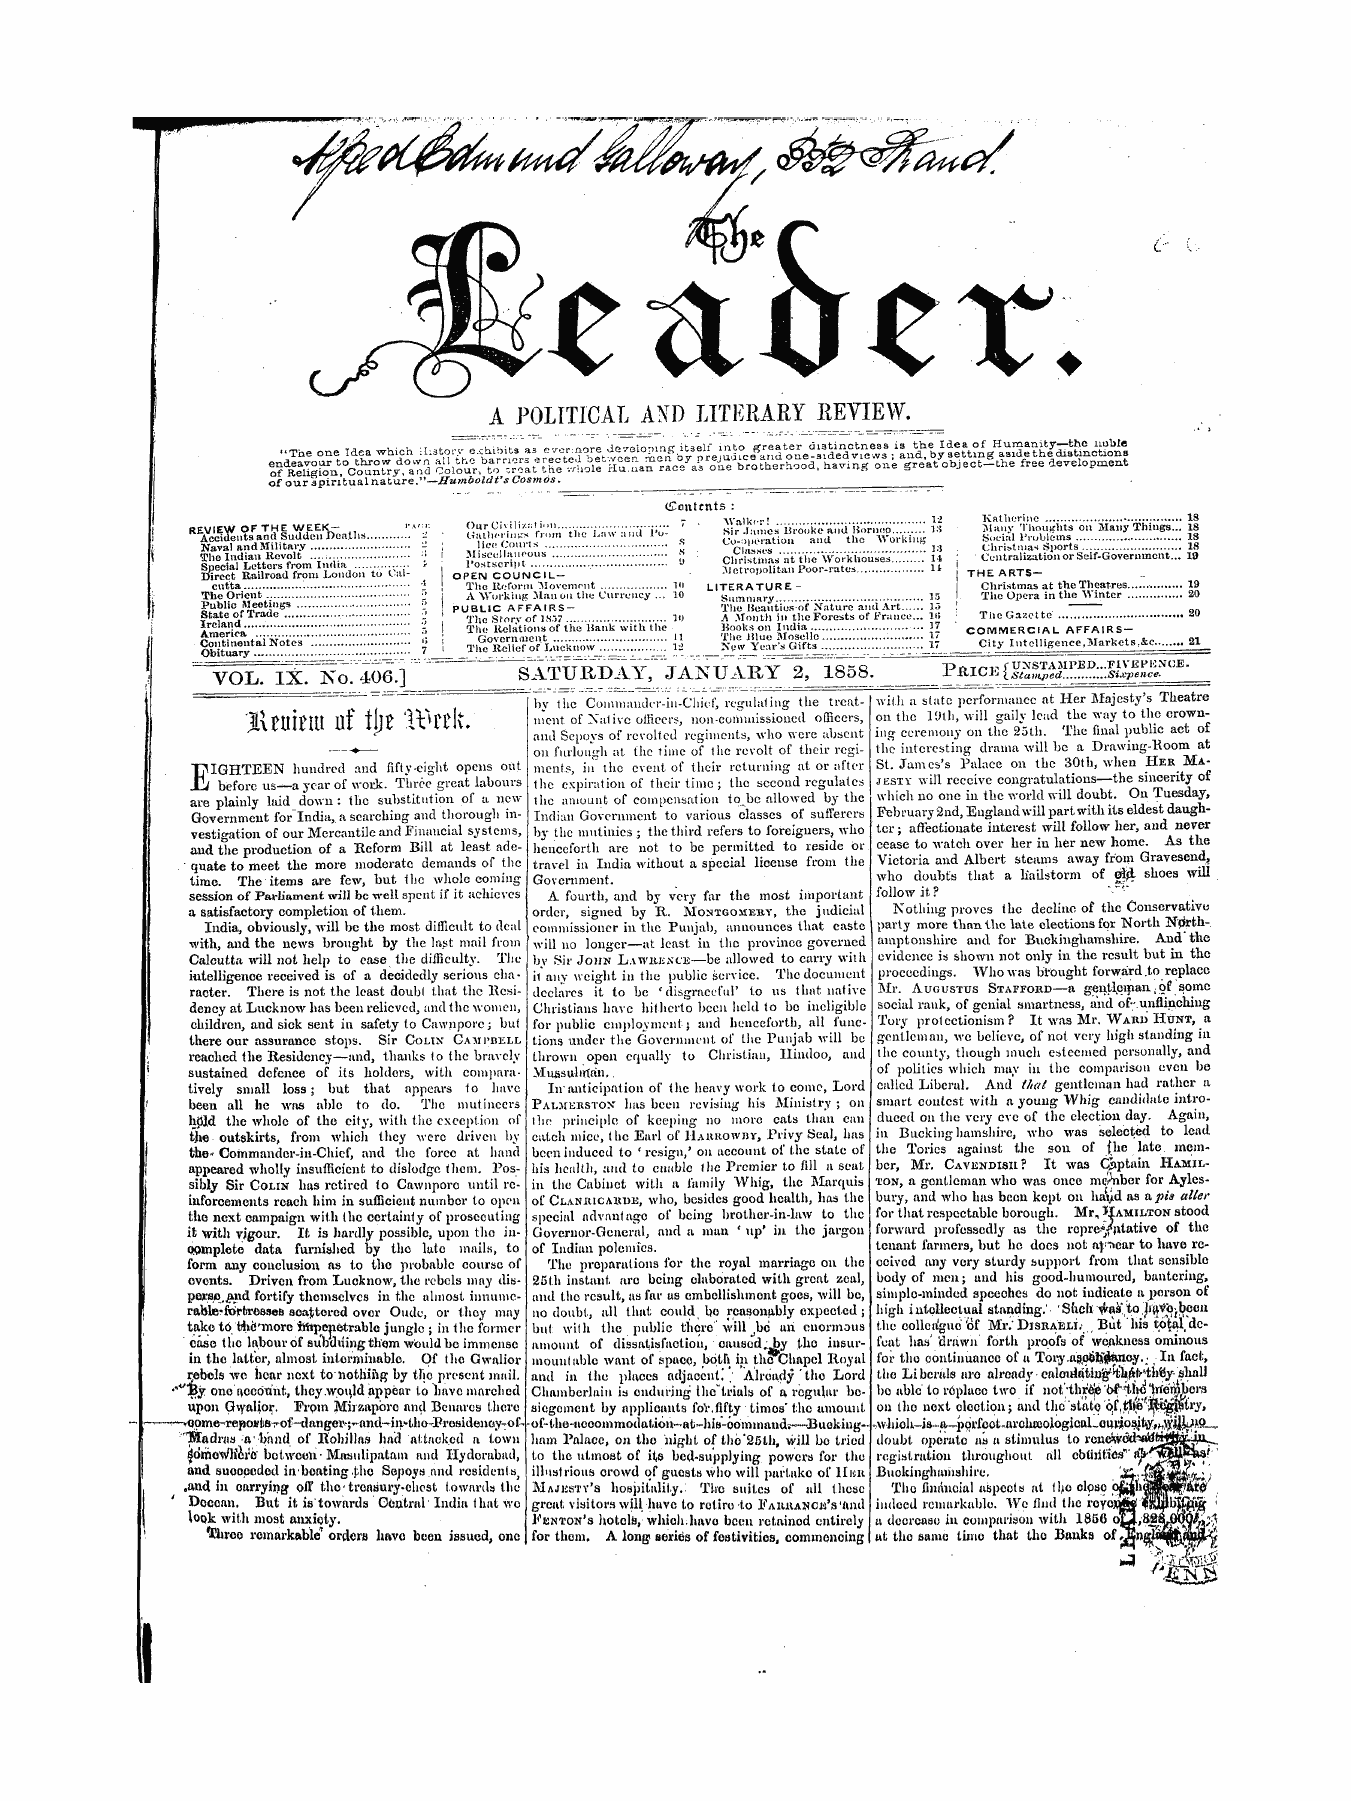 Leader (1850-1860): jS F Y, 1st edition - ( Contents : ¦